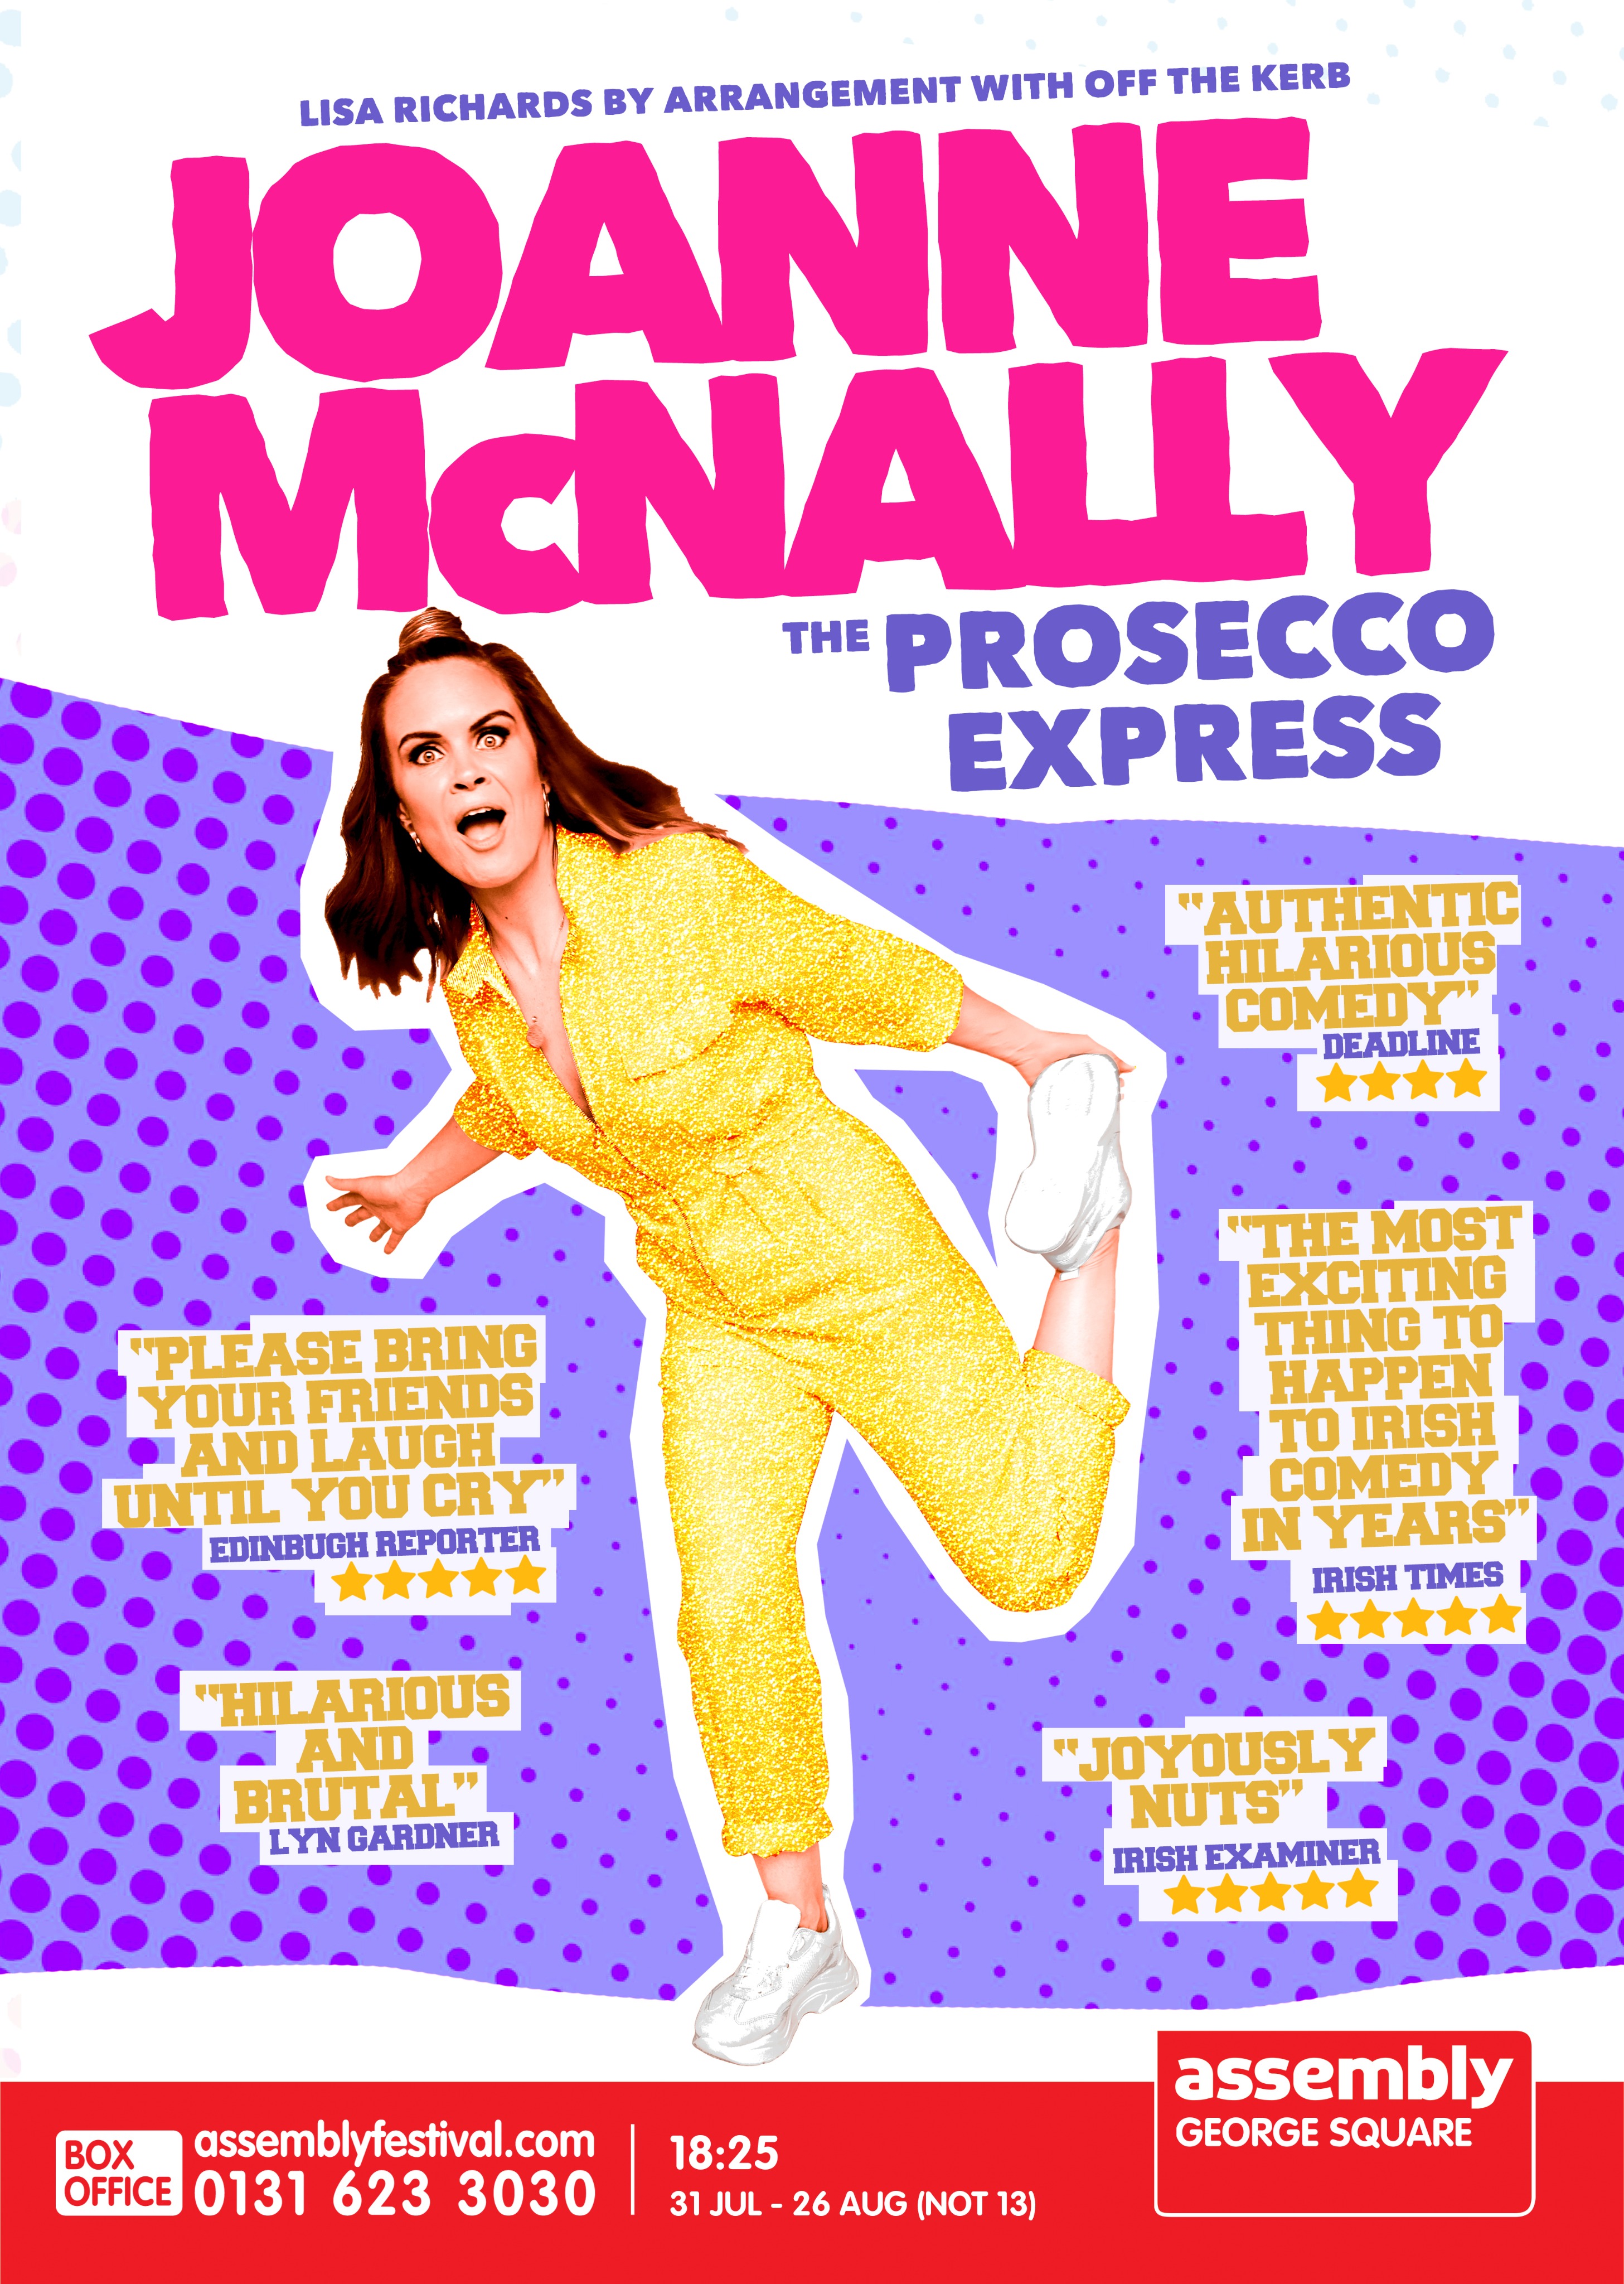 The poster for Joanne McNally: The Prosecco Express